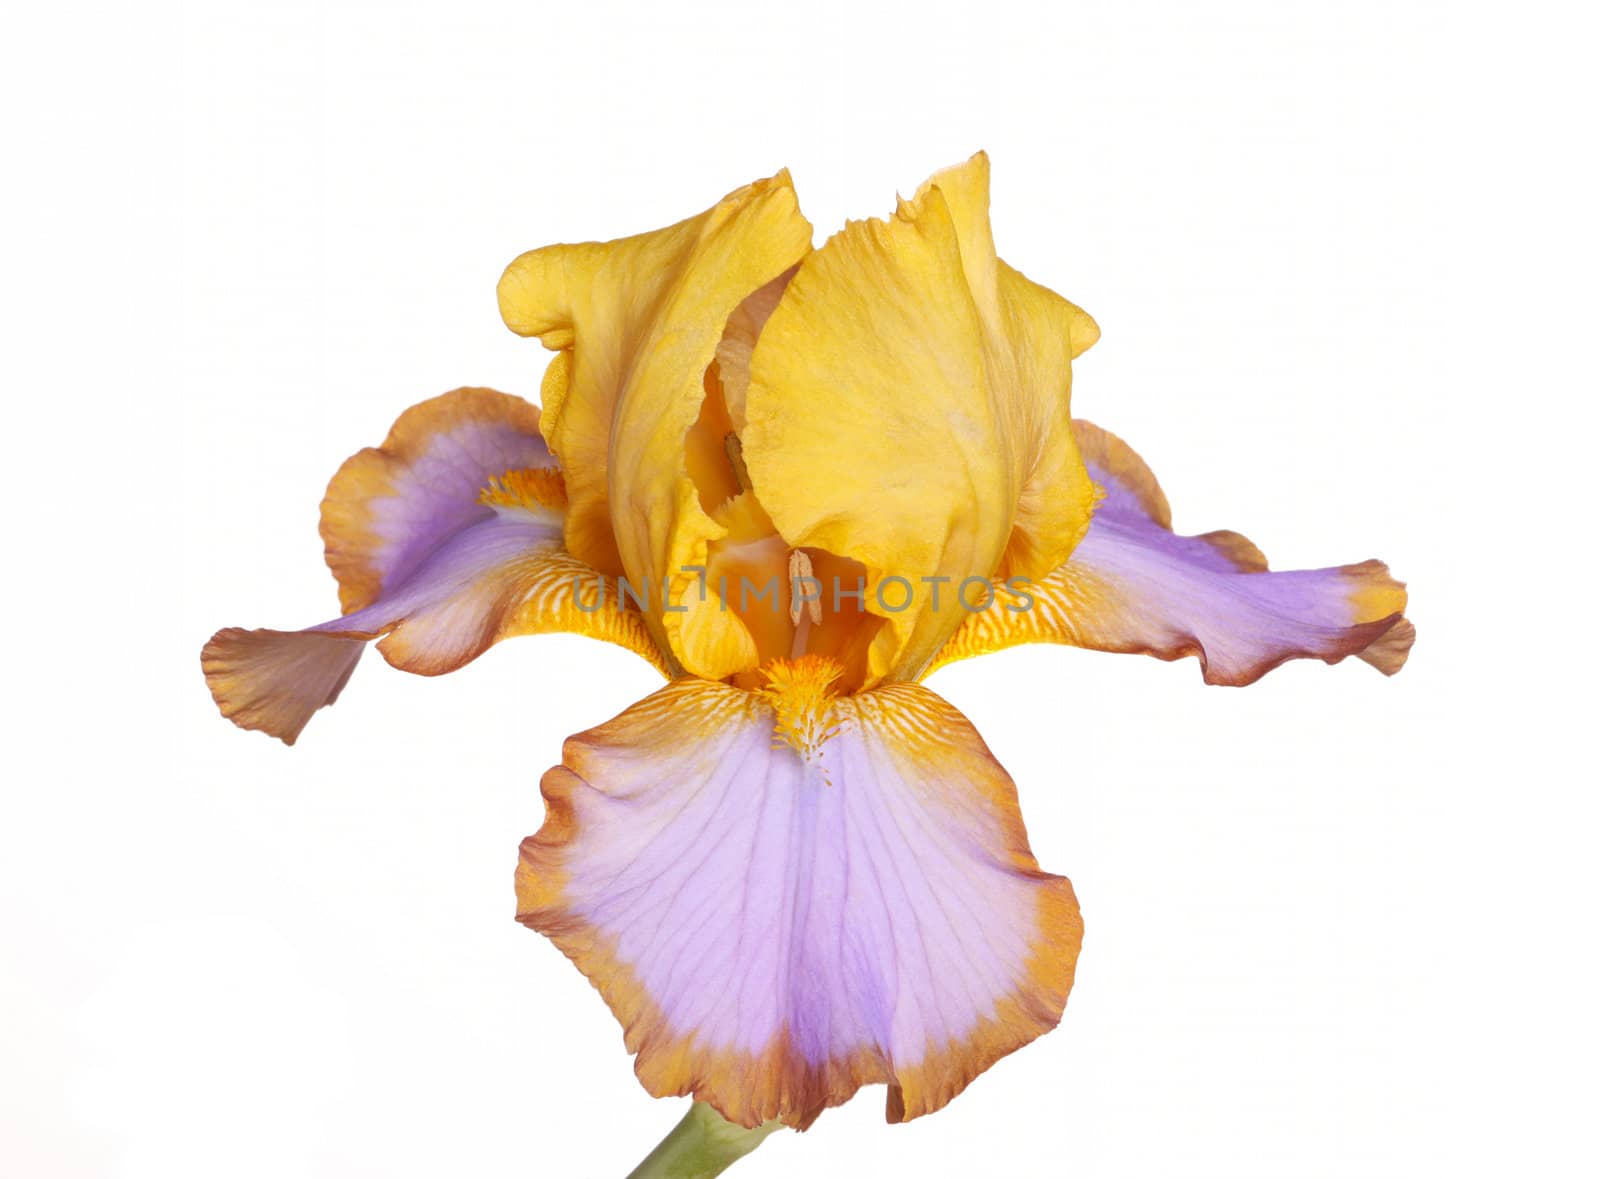 Single yellow, brown and purple flower of bearded iris (Iris germanica) cultivar Brown Lasso isolated against a white background